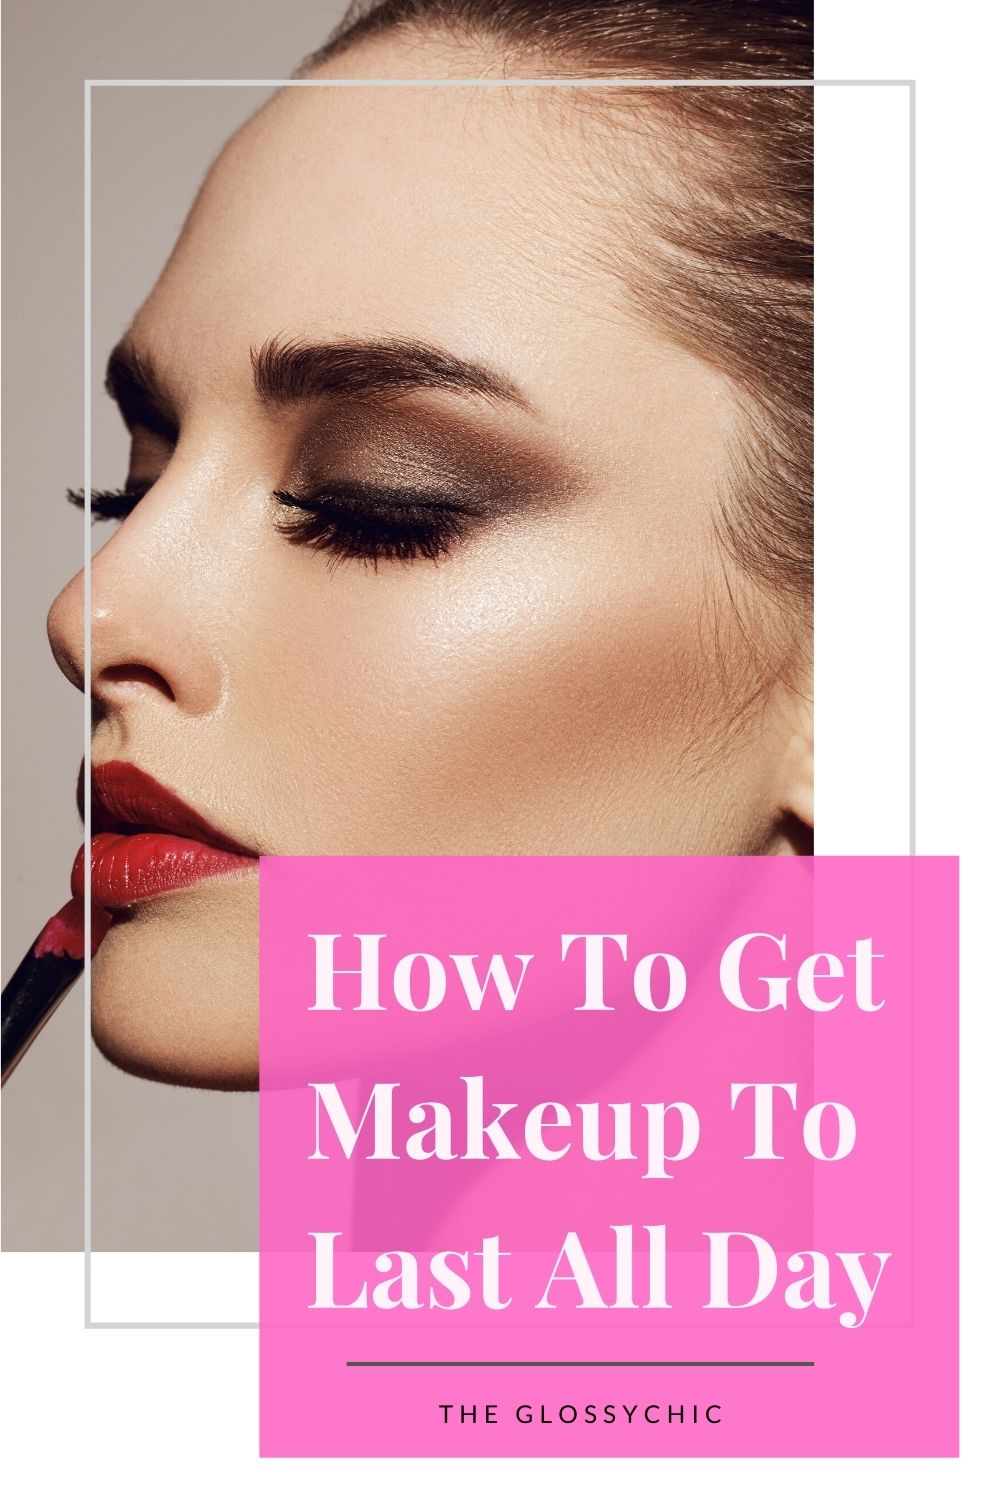 How to get makeup to last all day